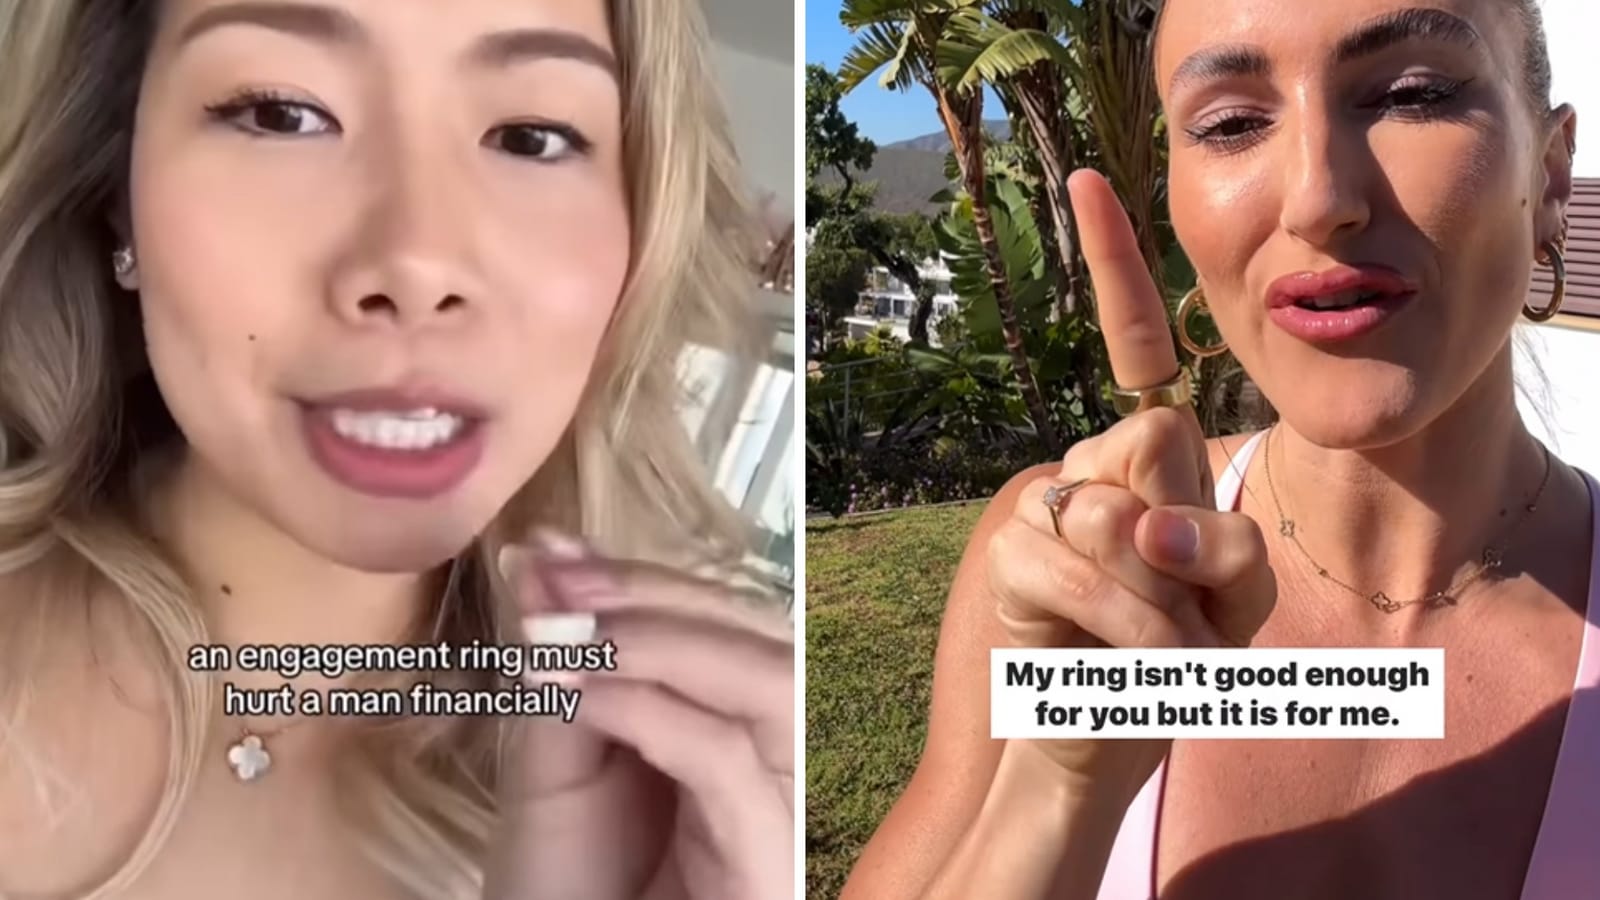 ‘Your engagement ring must hurt a man financially’: Fitness influencer shuts down woman shaming her ring. Watch